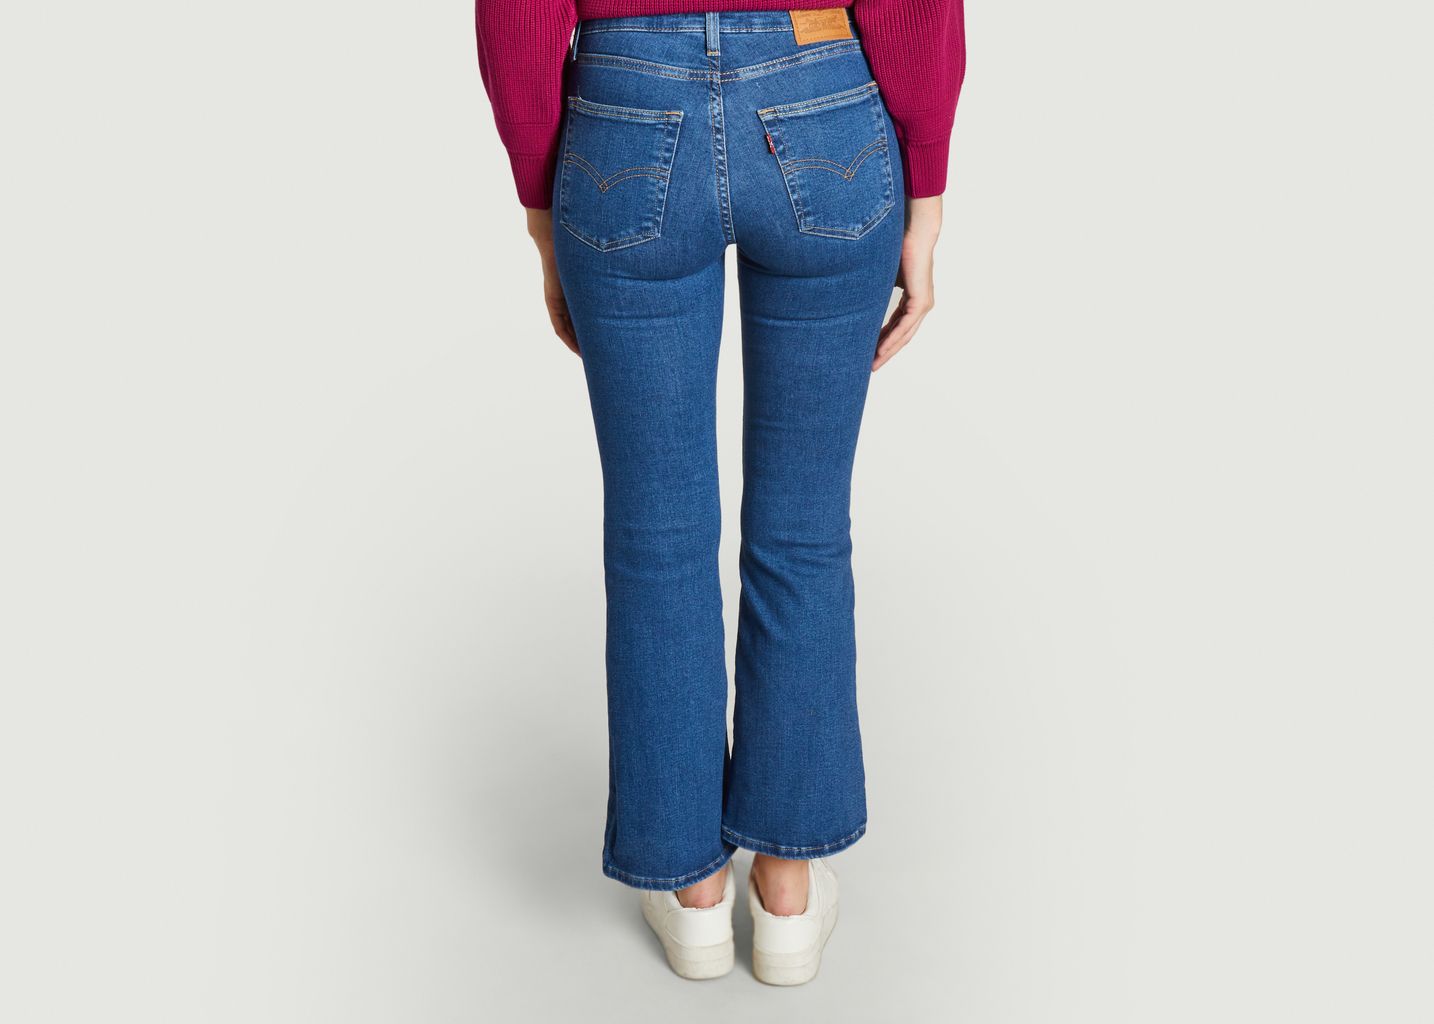 Jean 726™ flare - Levi's Red Tab